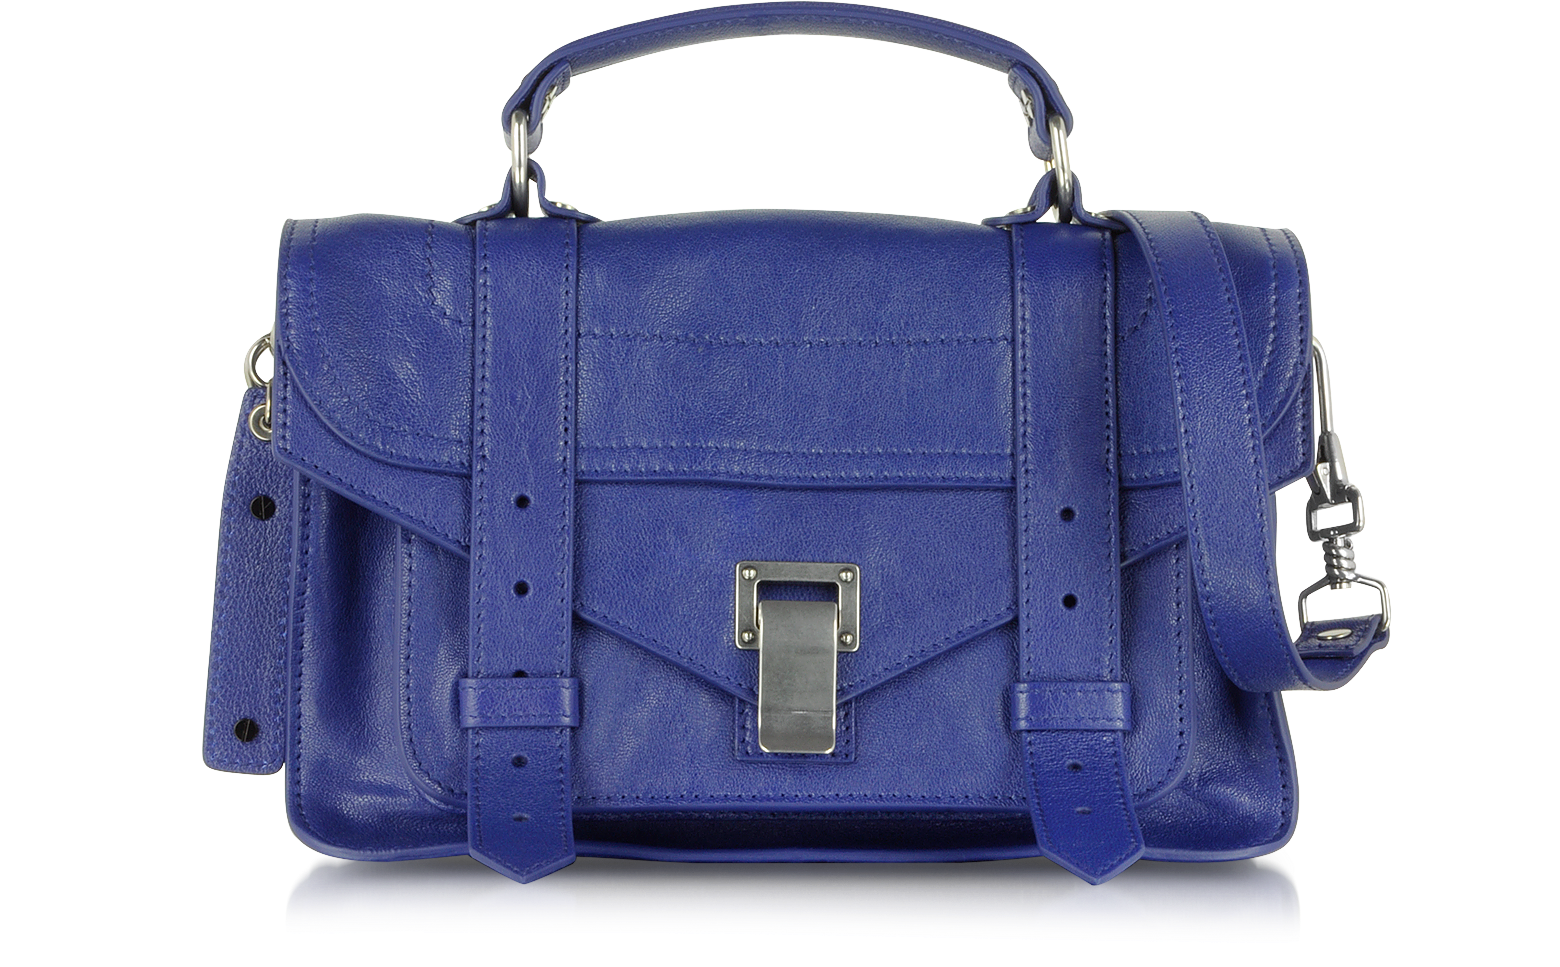 Proenza Schouler PS1 Tiny Violet Lux Leather Satchel Bag at FORZIERI